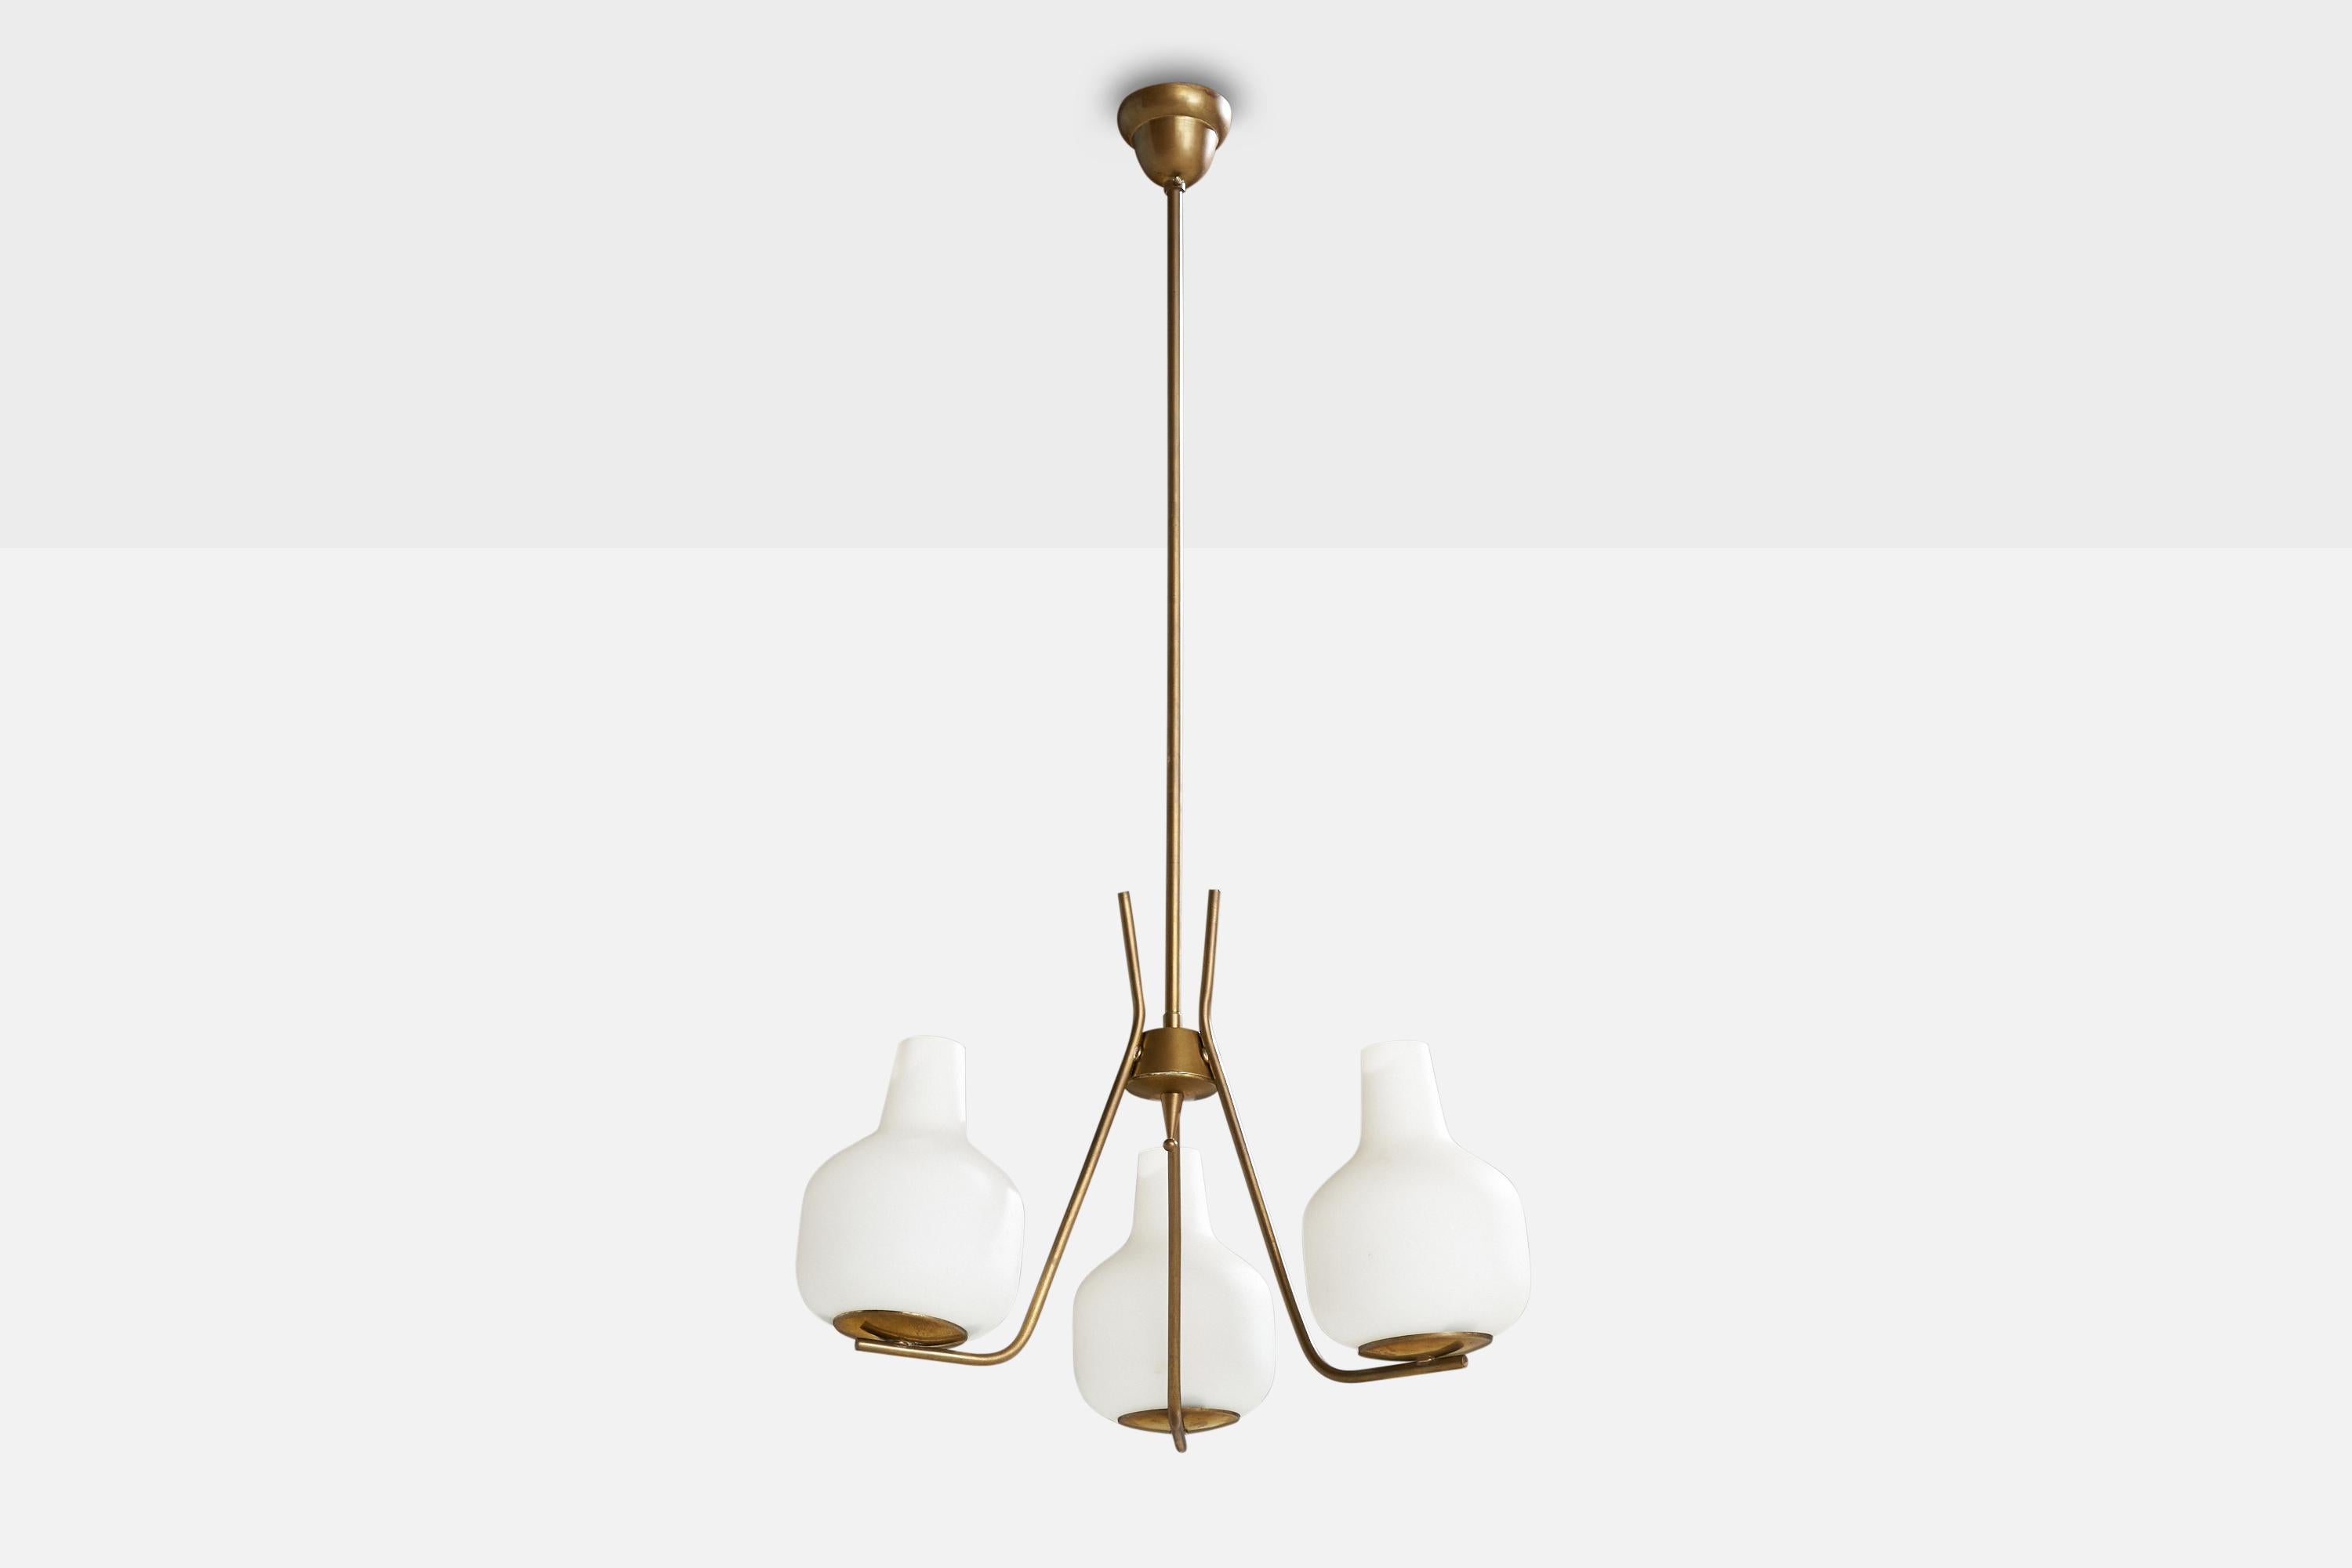 A brass and opaline glass chandelier attributed to Stilnovo, Italy, 1950s

Dimensions of canopy (inches): 2.25”  H x 3” Diameter
Socket takes standard E-14 bulbs. 3 sockets There is no maximum wattage stated on the fixture. All lighting will be